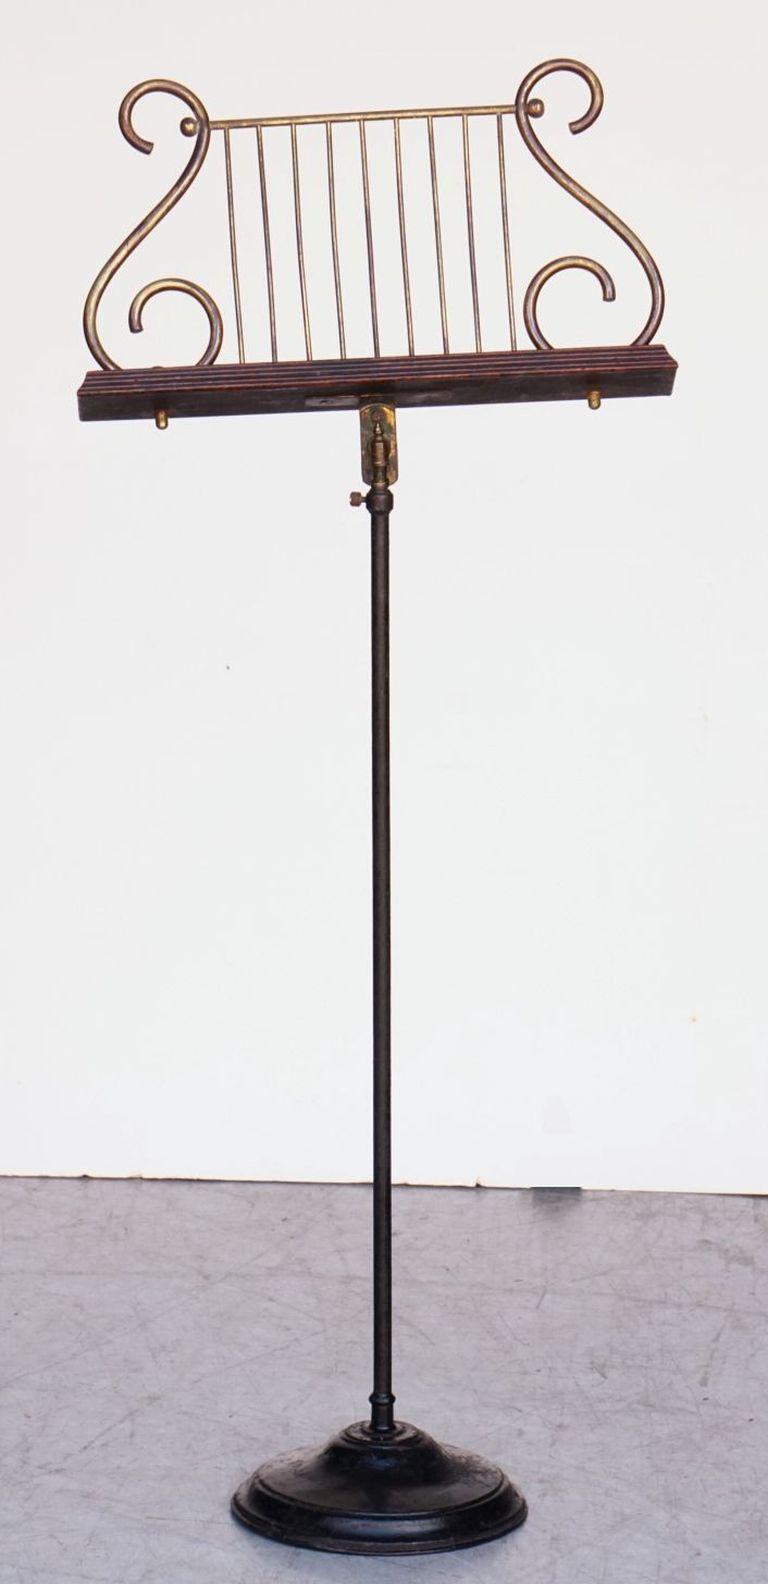 A handsome English music stand from the Edwardian Era, featuring a lyre-shaped folio easel of tubular brass and turned wood, mounted to a tubular stand allowing for adjustable heights and set upon a round iron stand.

Fully retracted height: 39